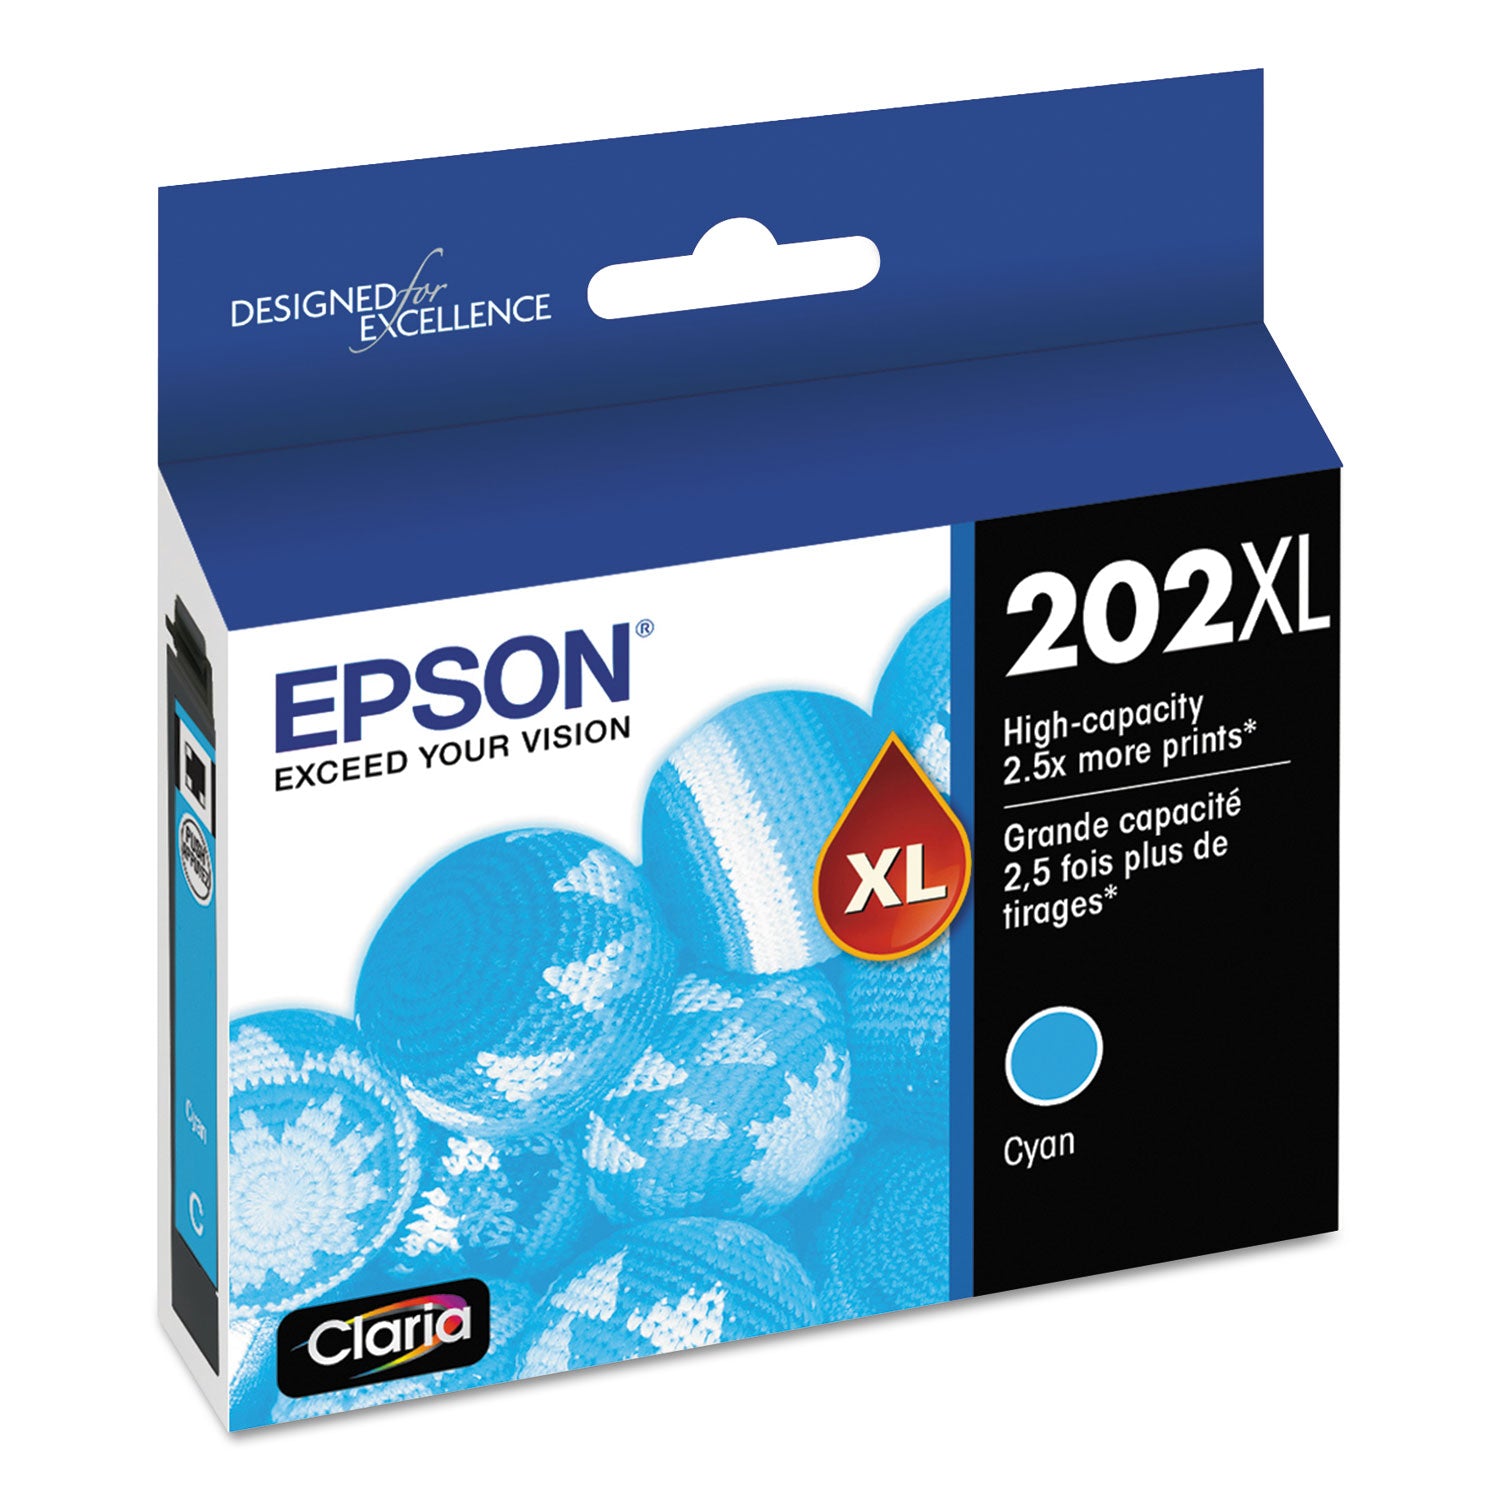 t202xl220-s-202xl-claria-high-yield-ink-470-page-yield-cyan_epst202xl220s - 2